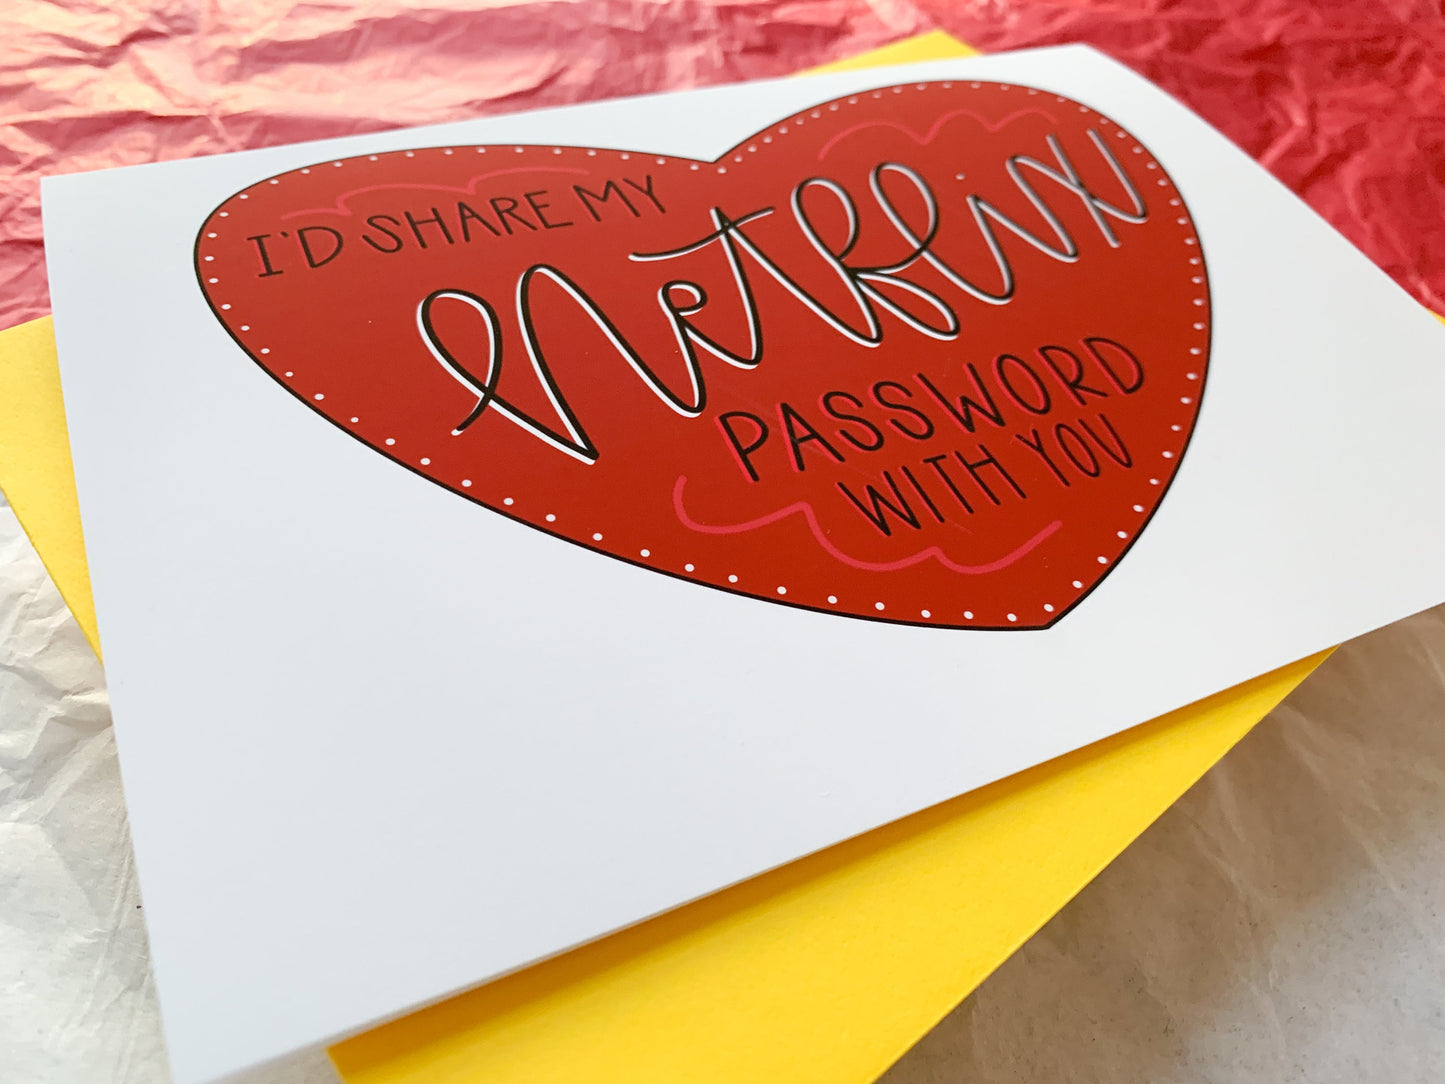 I'd Share My Netflix Password with You Handmade Valentine Card by StoneDonut Design